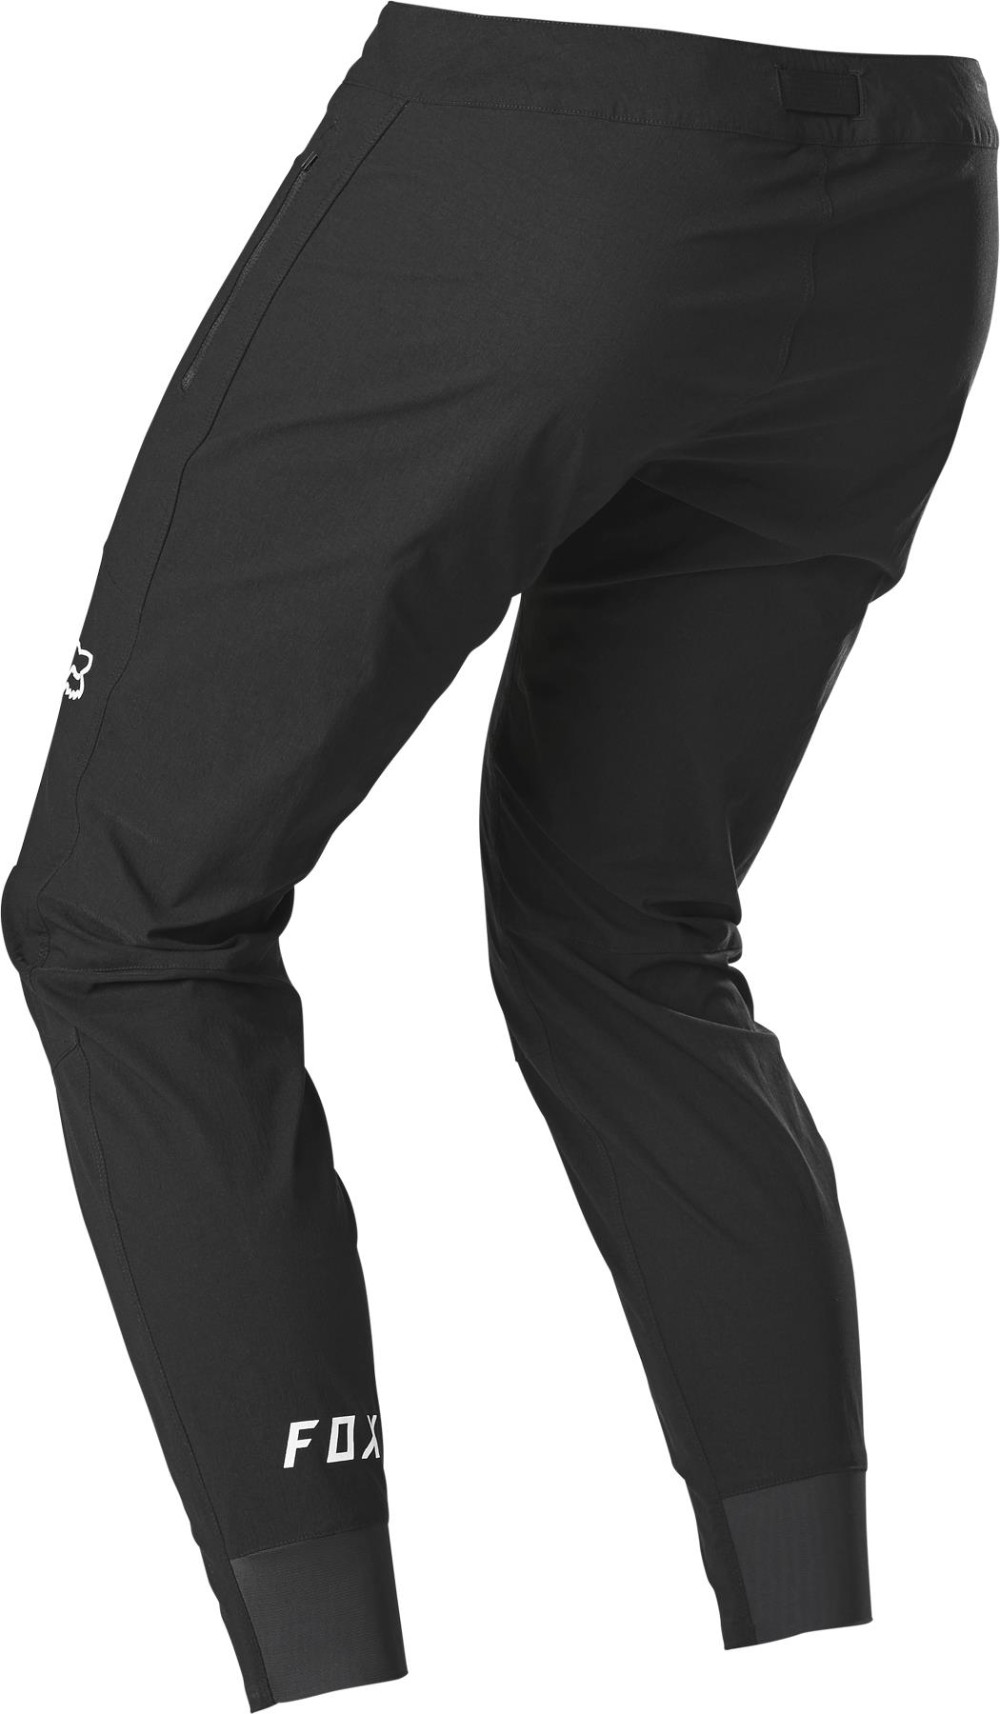 Ranger MTB Cycling Trousers image 1